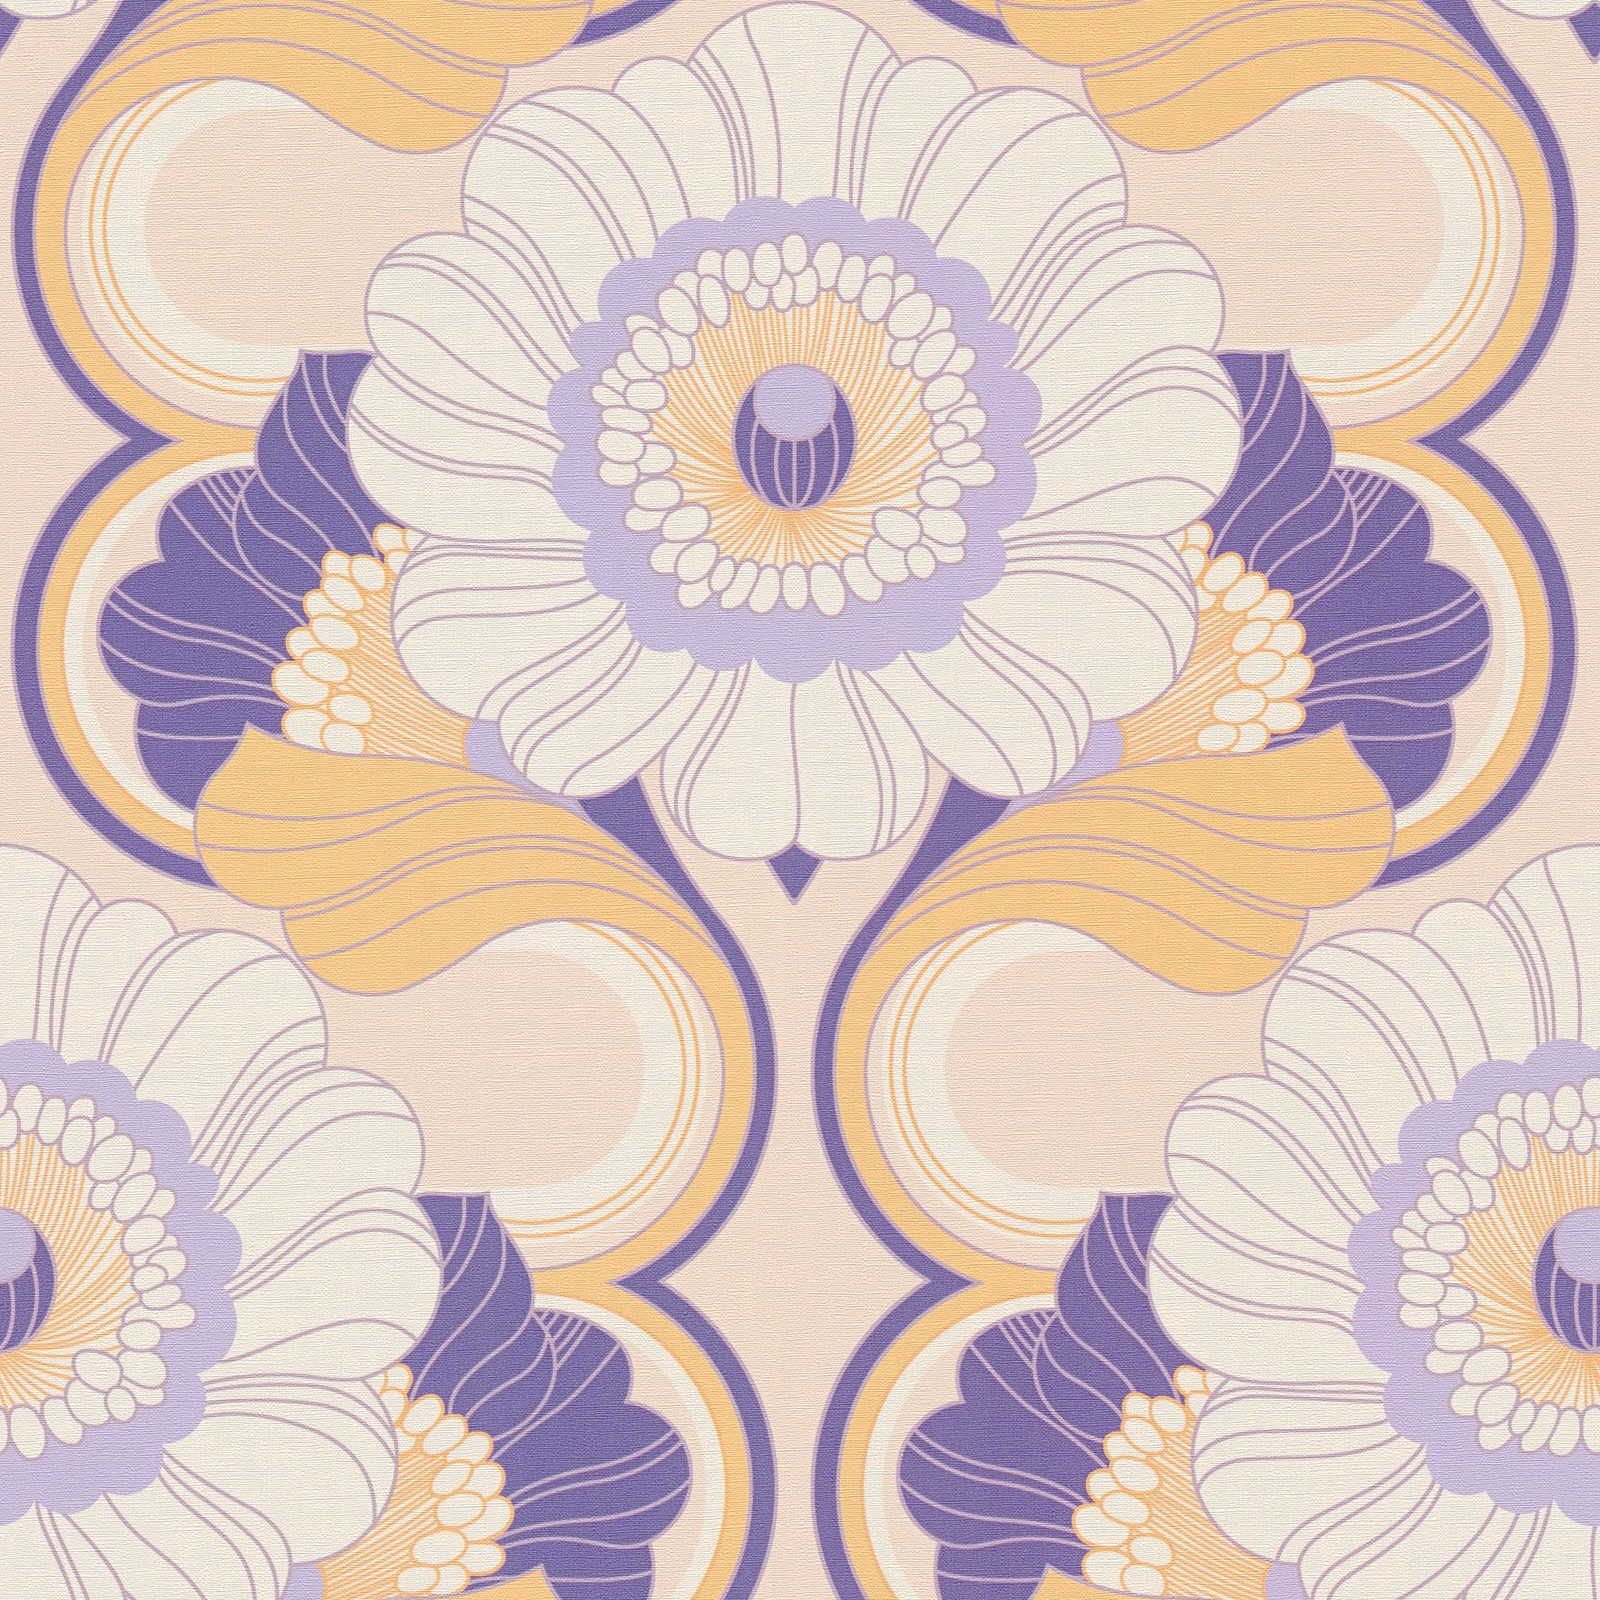 Retro wallpaper with floral pattern - beige, yellow, purple
